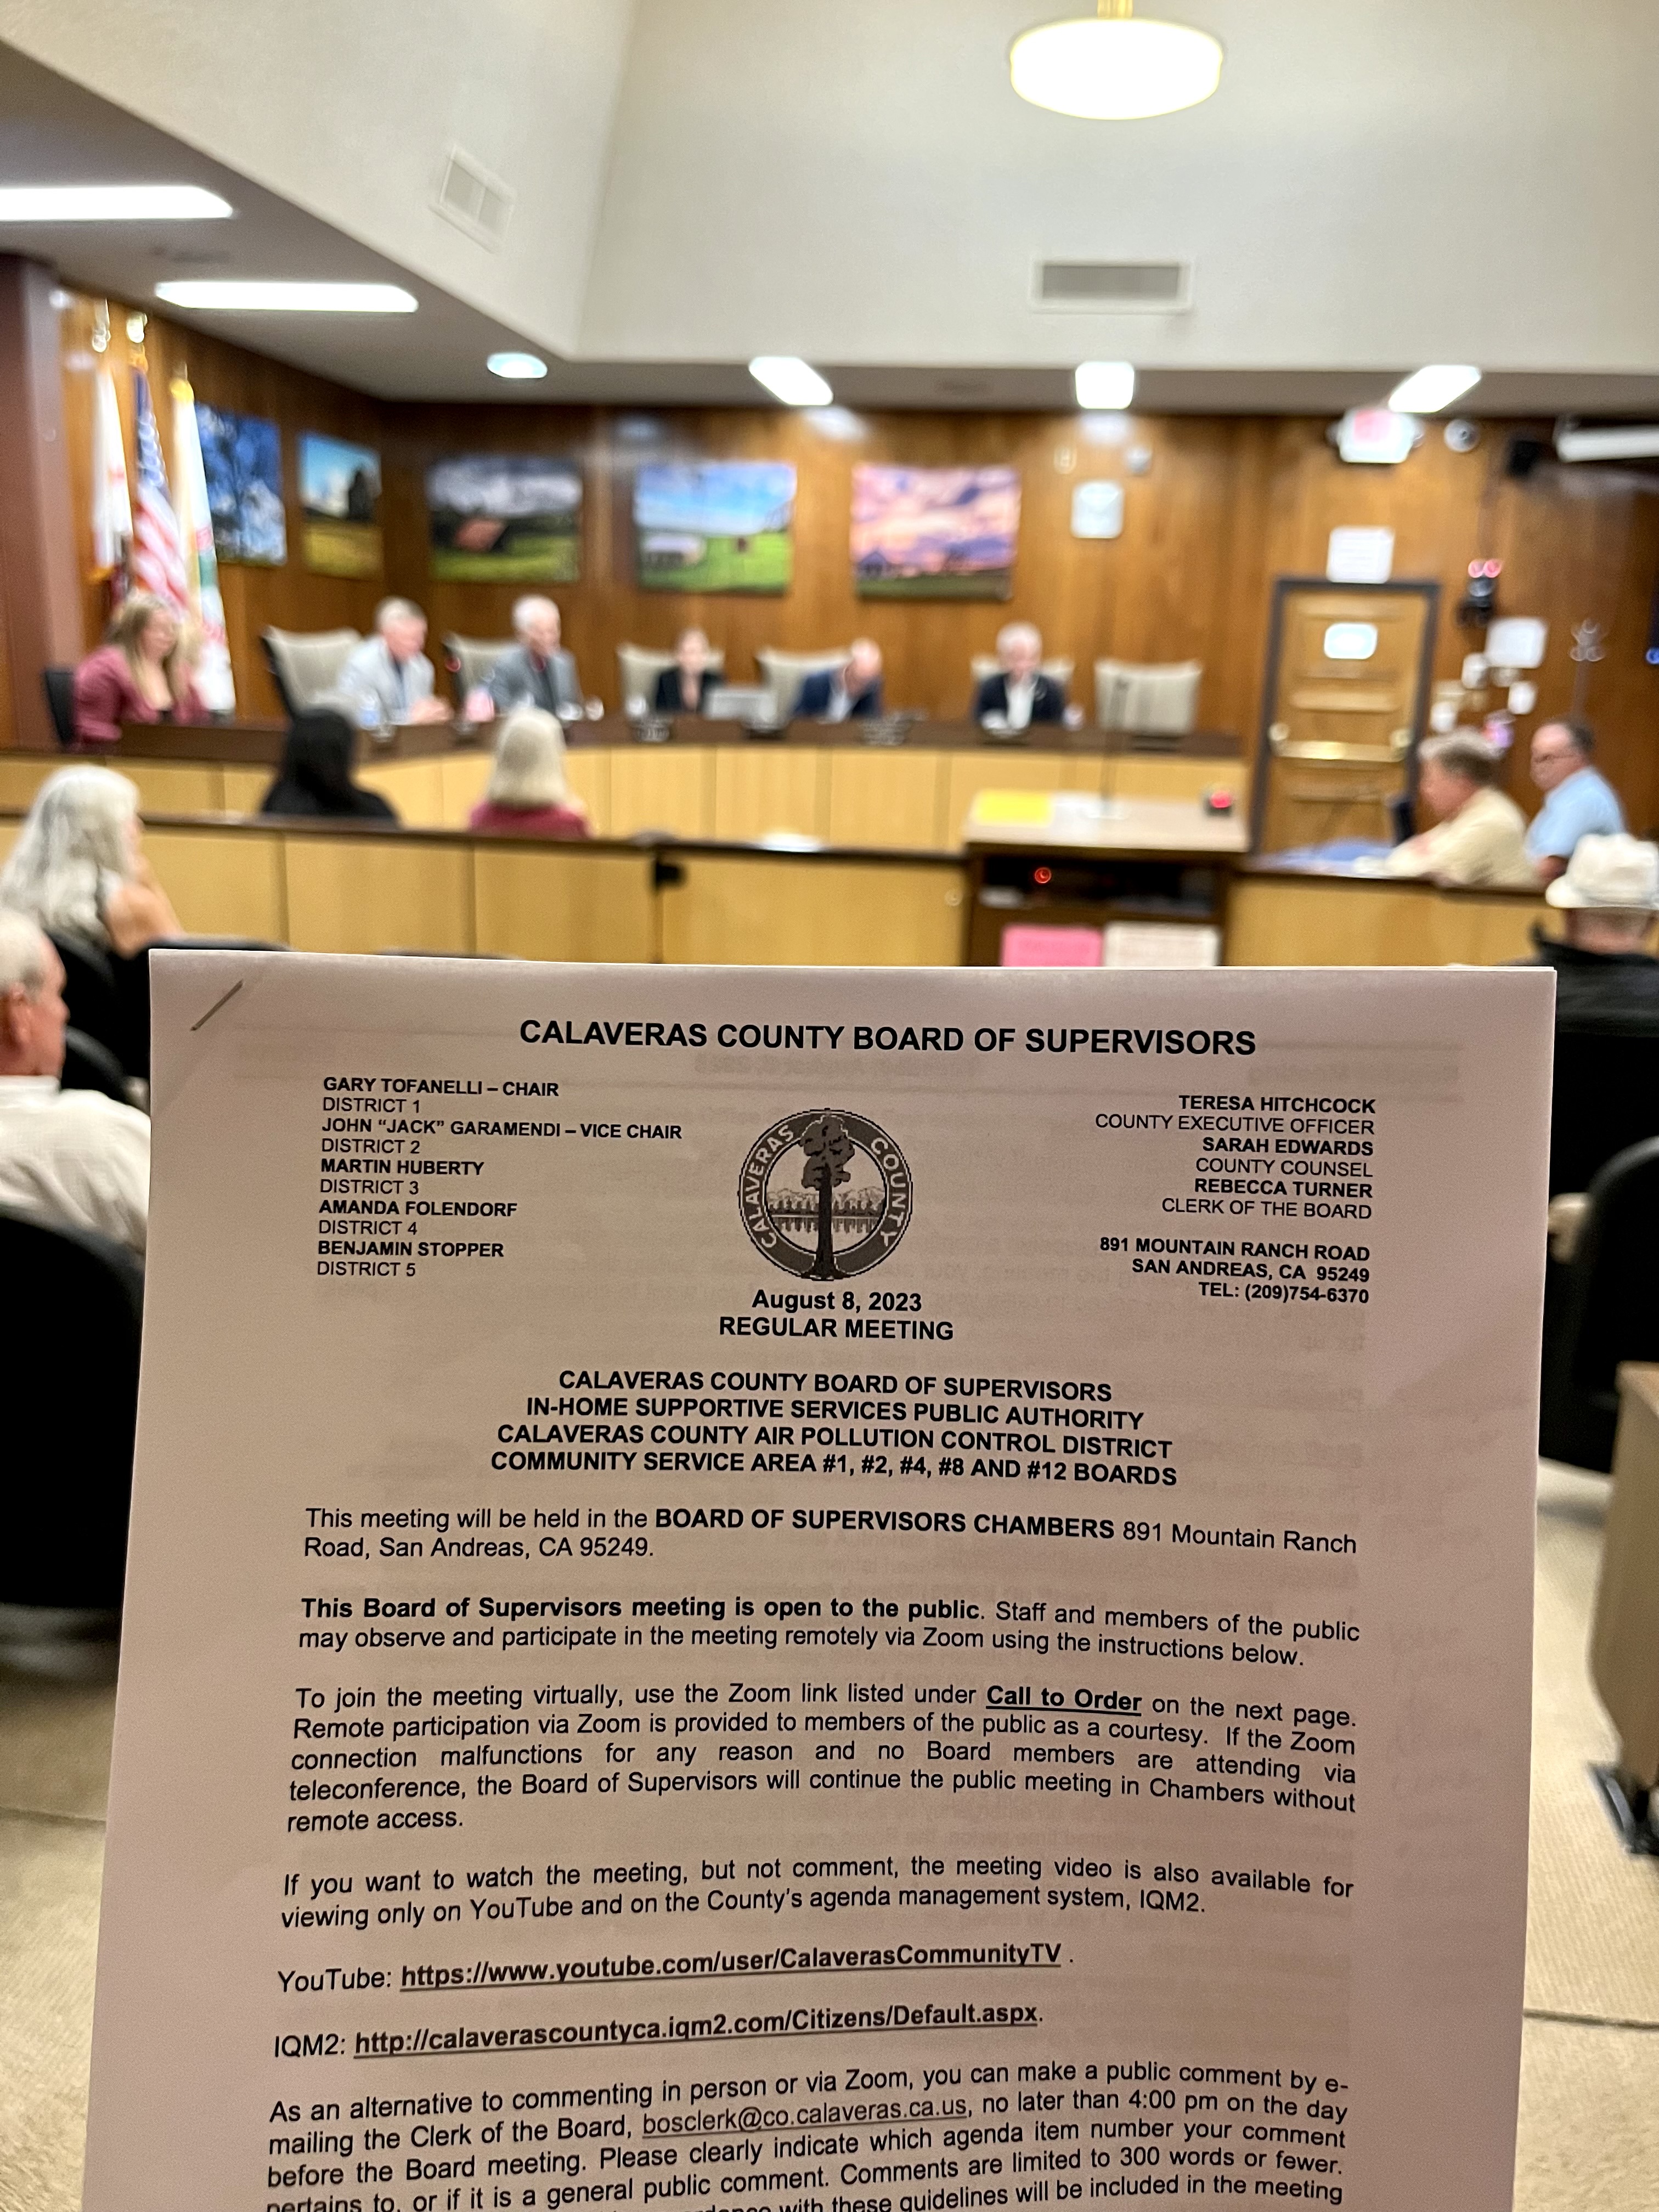 A paper copy of the Calaveras County Board of Supervisors agenda for the regular meeting is shown in focus inside the Board of Supervisors Chambers with the five member board blurred in the background.